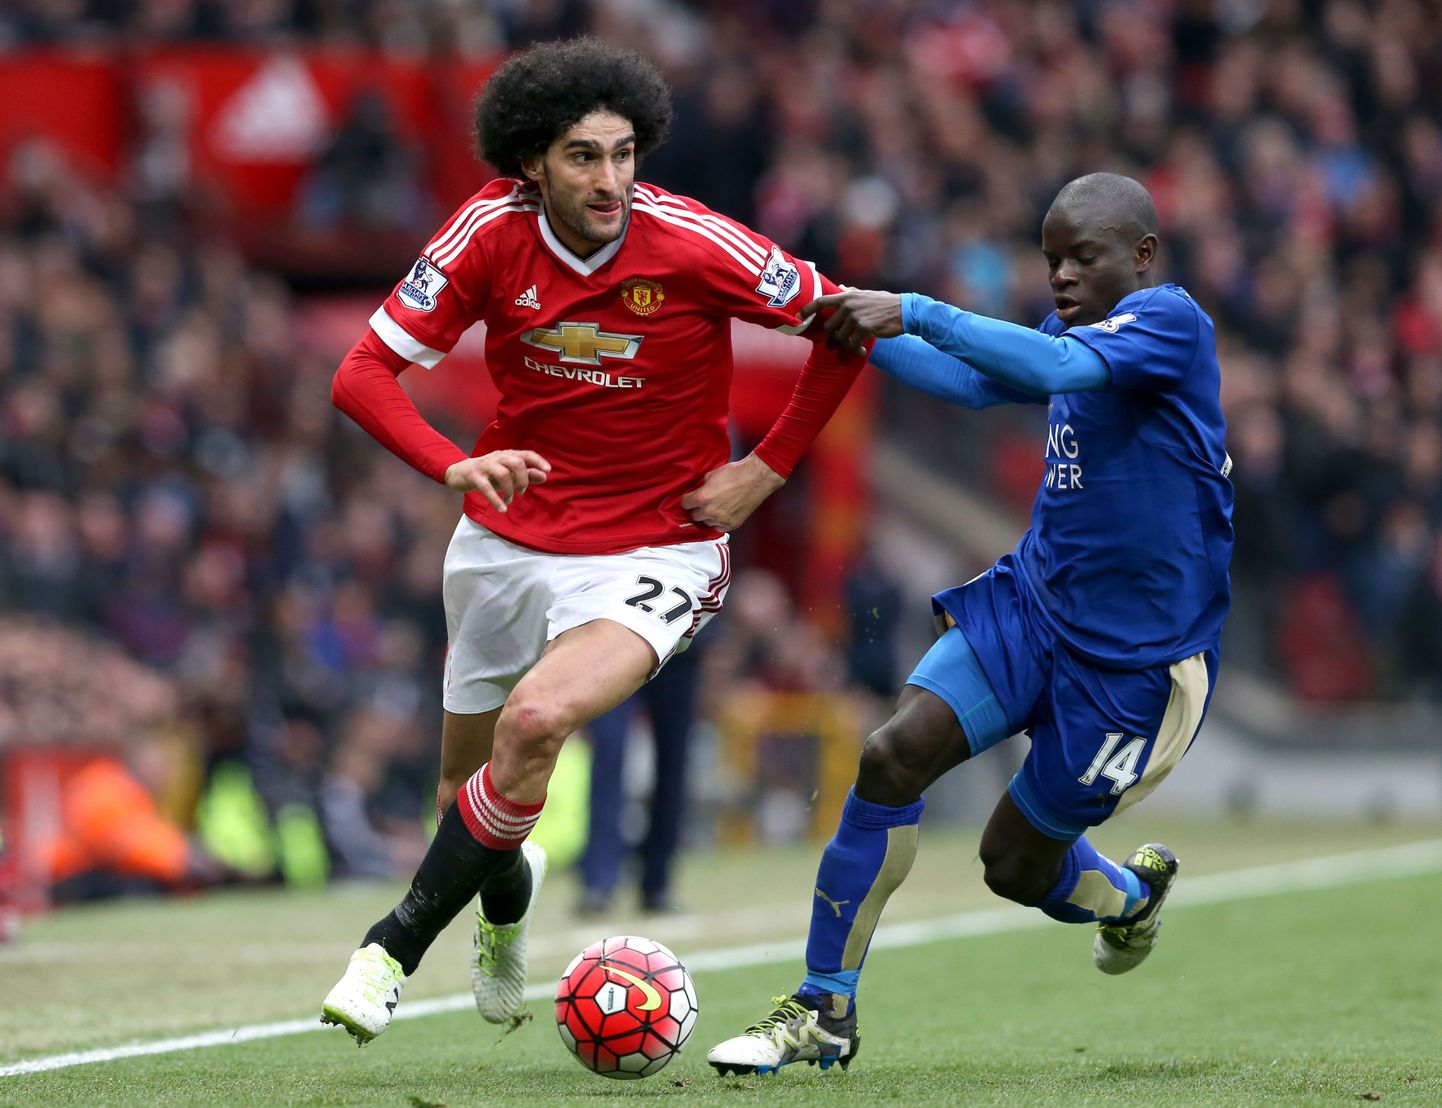 Manchester United's Marouane Fellaini, left, and Leicester City's N'Golo Kante chase the ball during their  English Premier League soccer match at Old Trafford, Manchester, Sunday May 1, 2016. (Martin Rickett / PA via AP) UNITED KINGDOM OUT - NO SALES - NO ARCHIVES